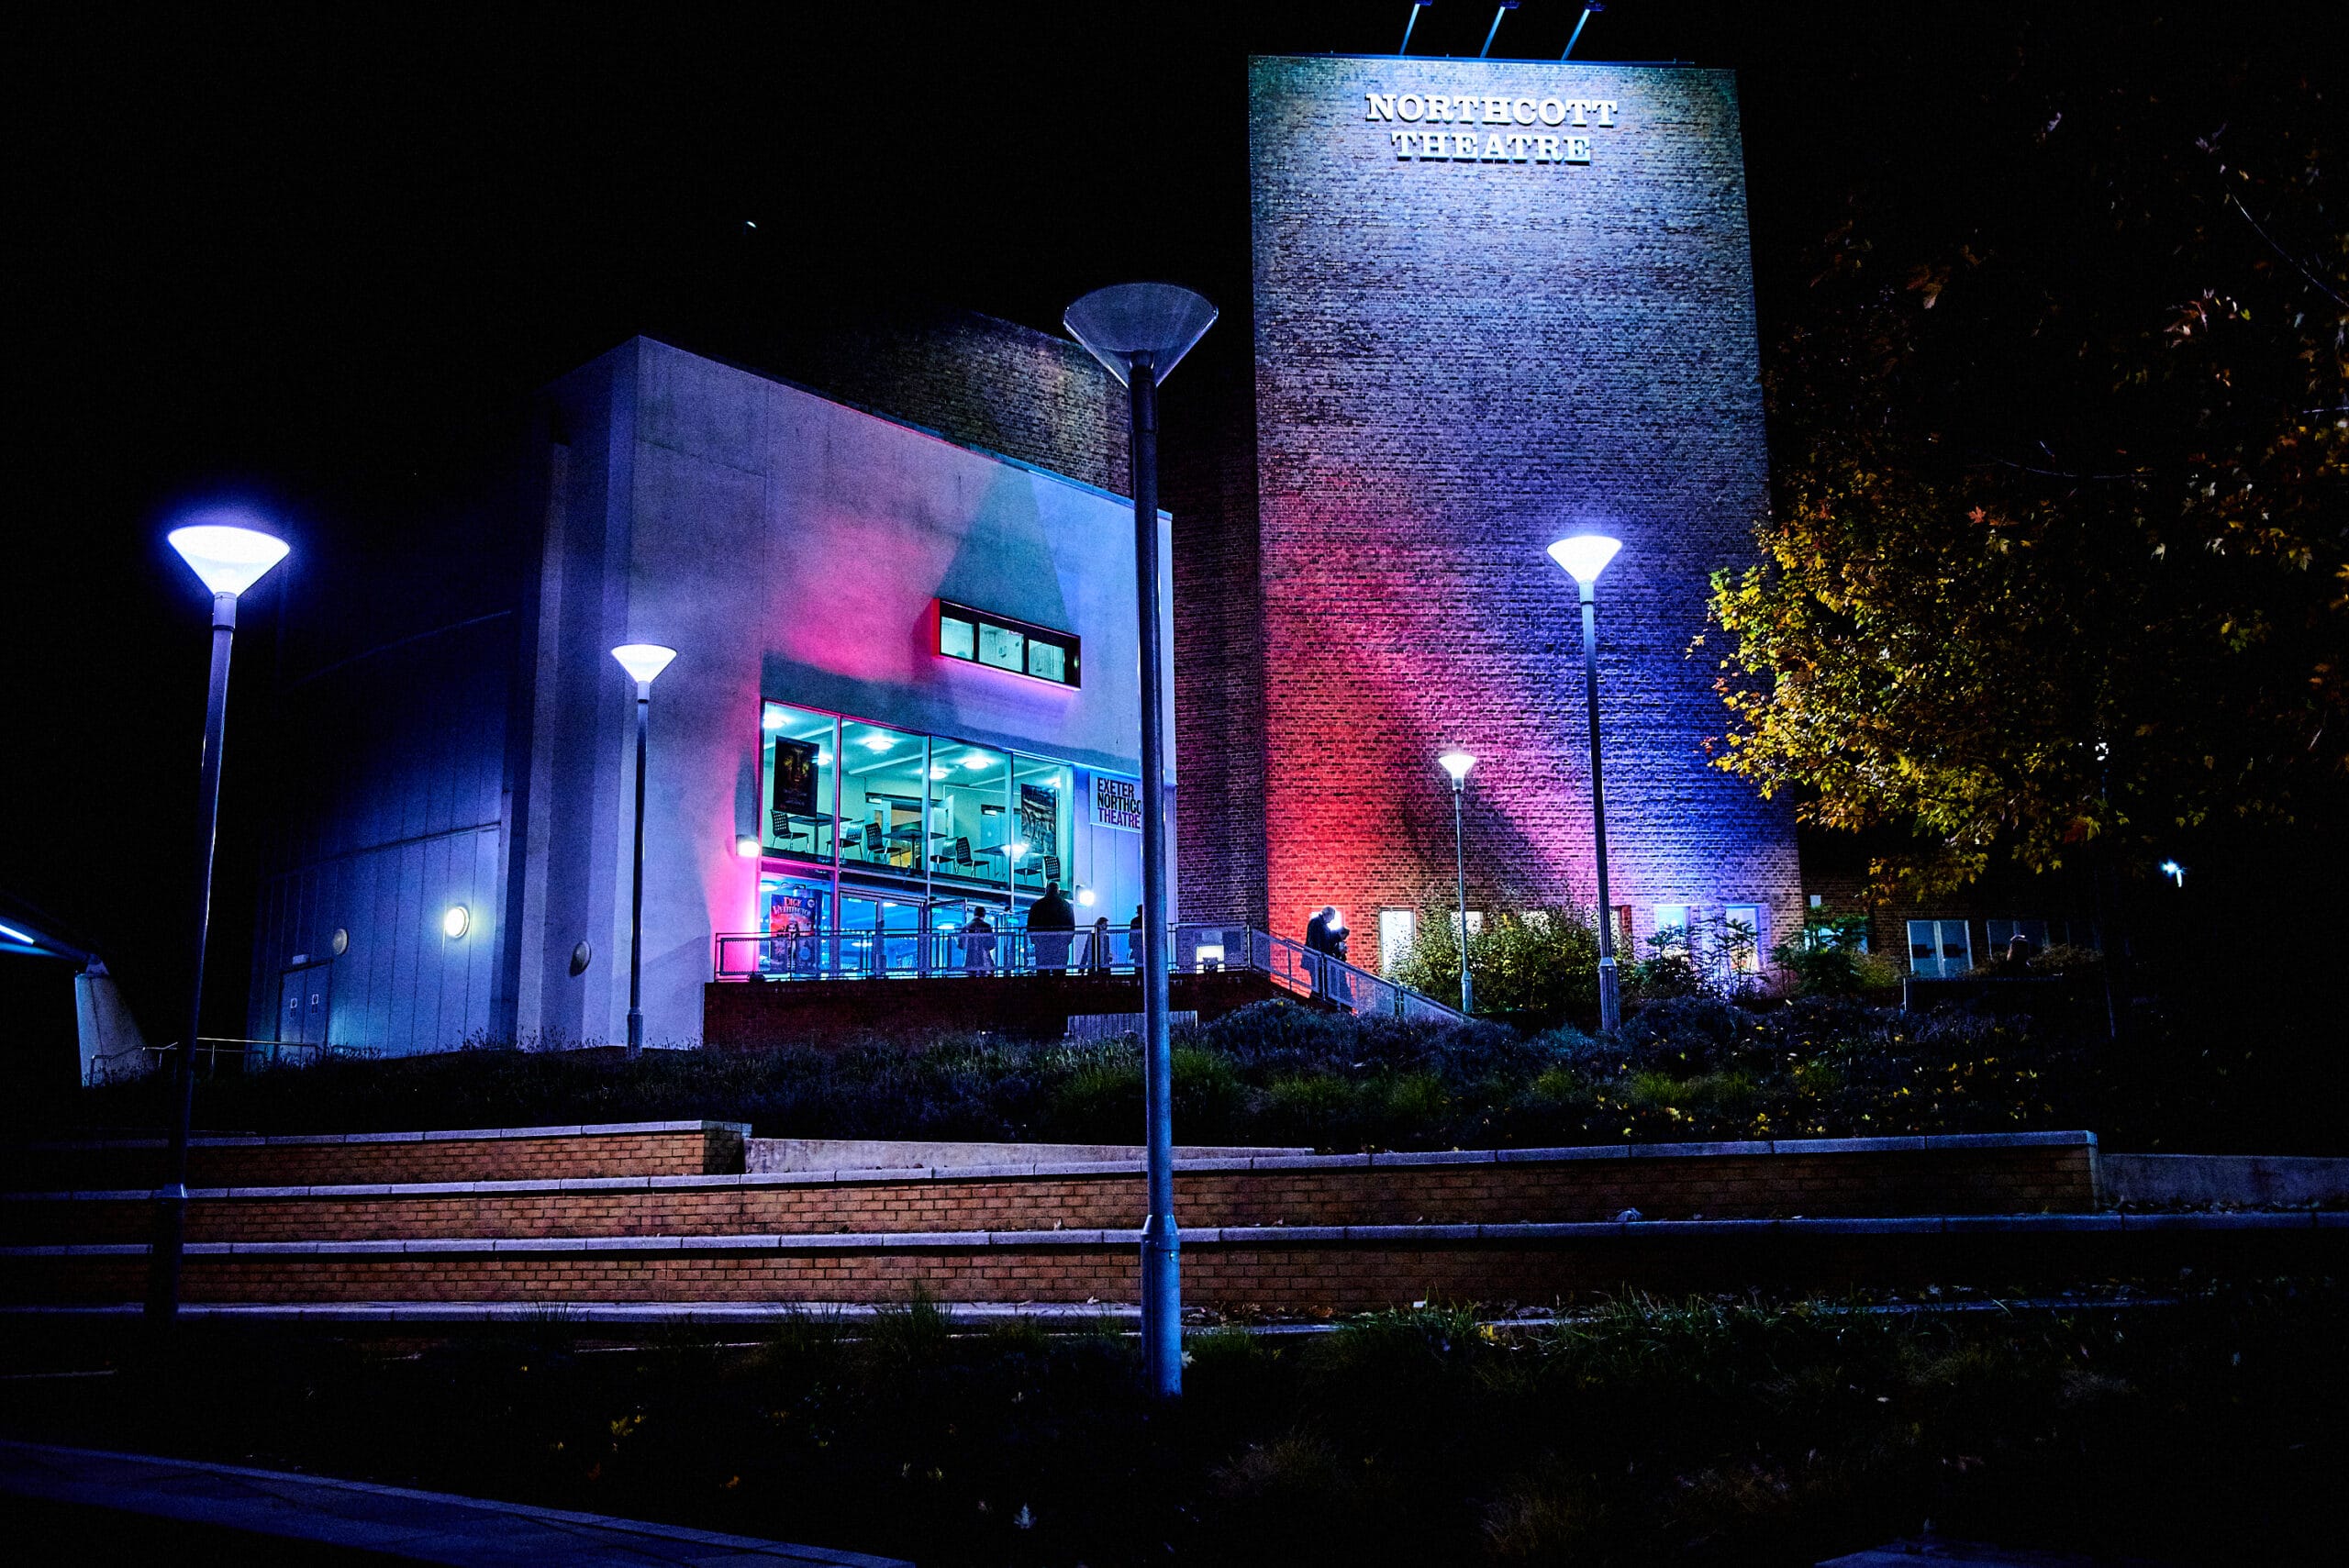 Photo of Northcott Theatre building at night